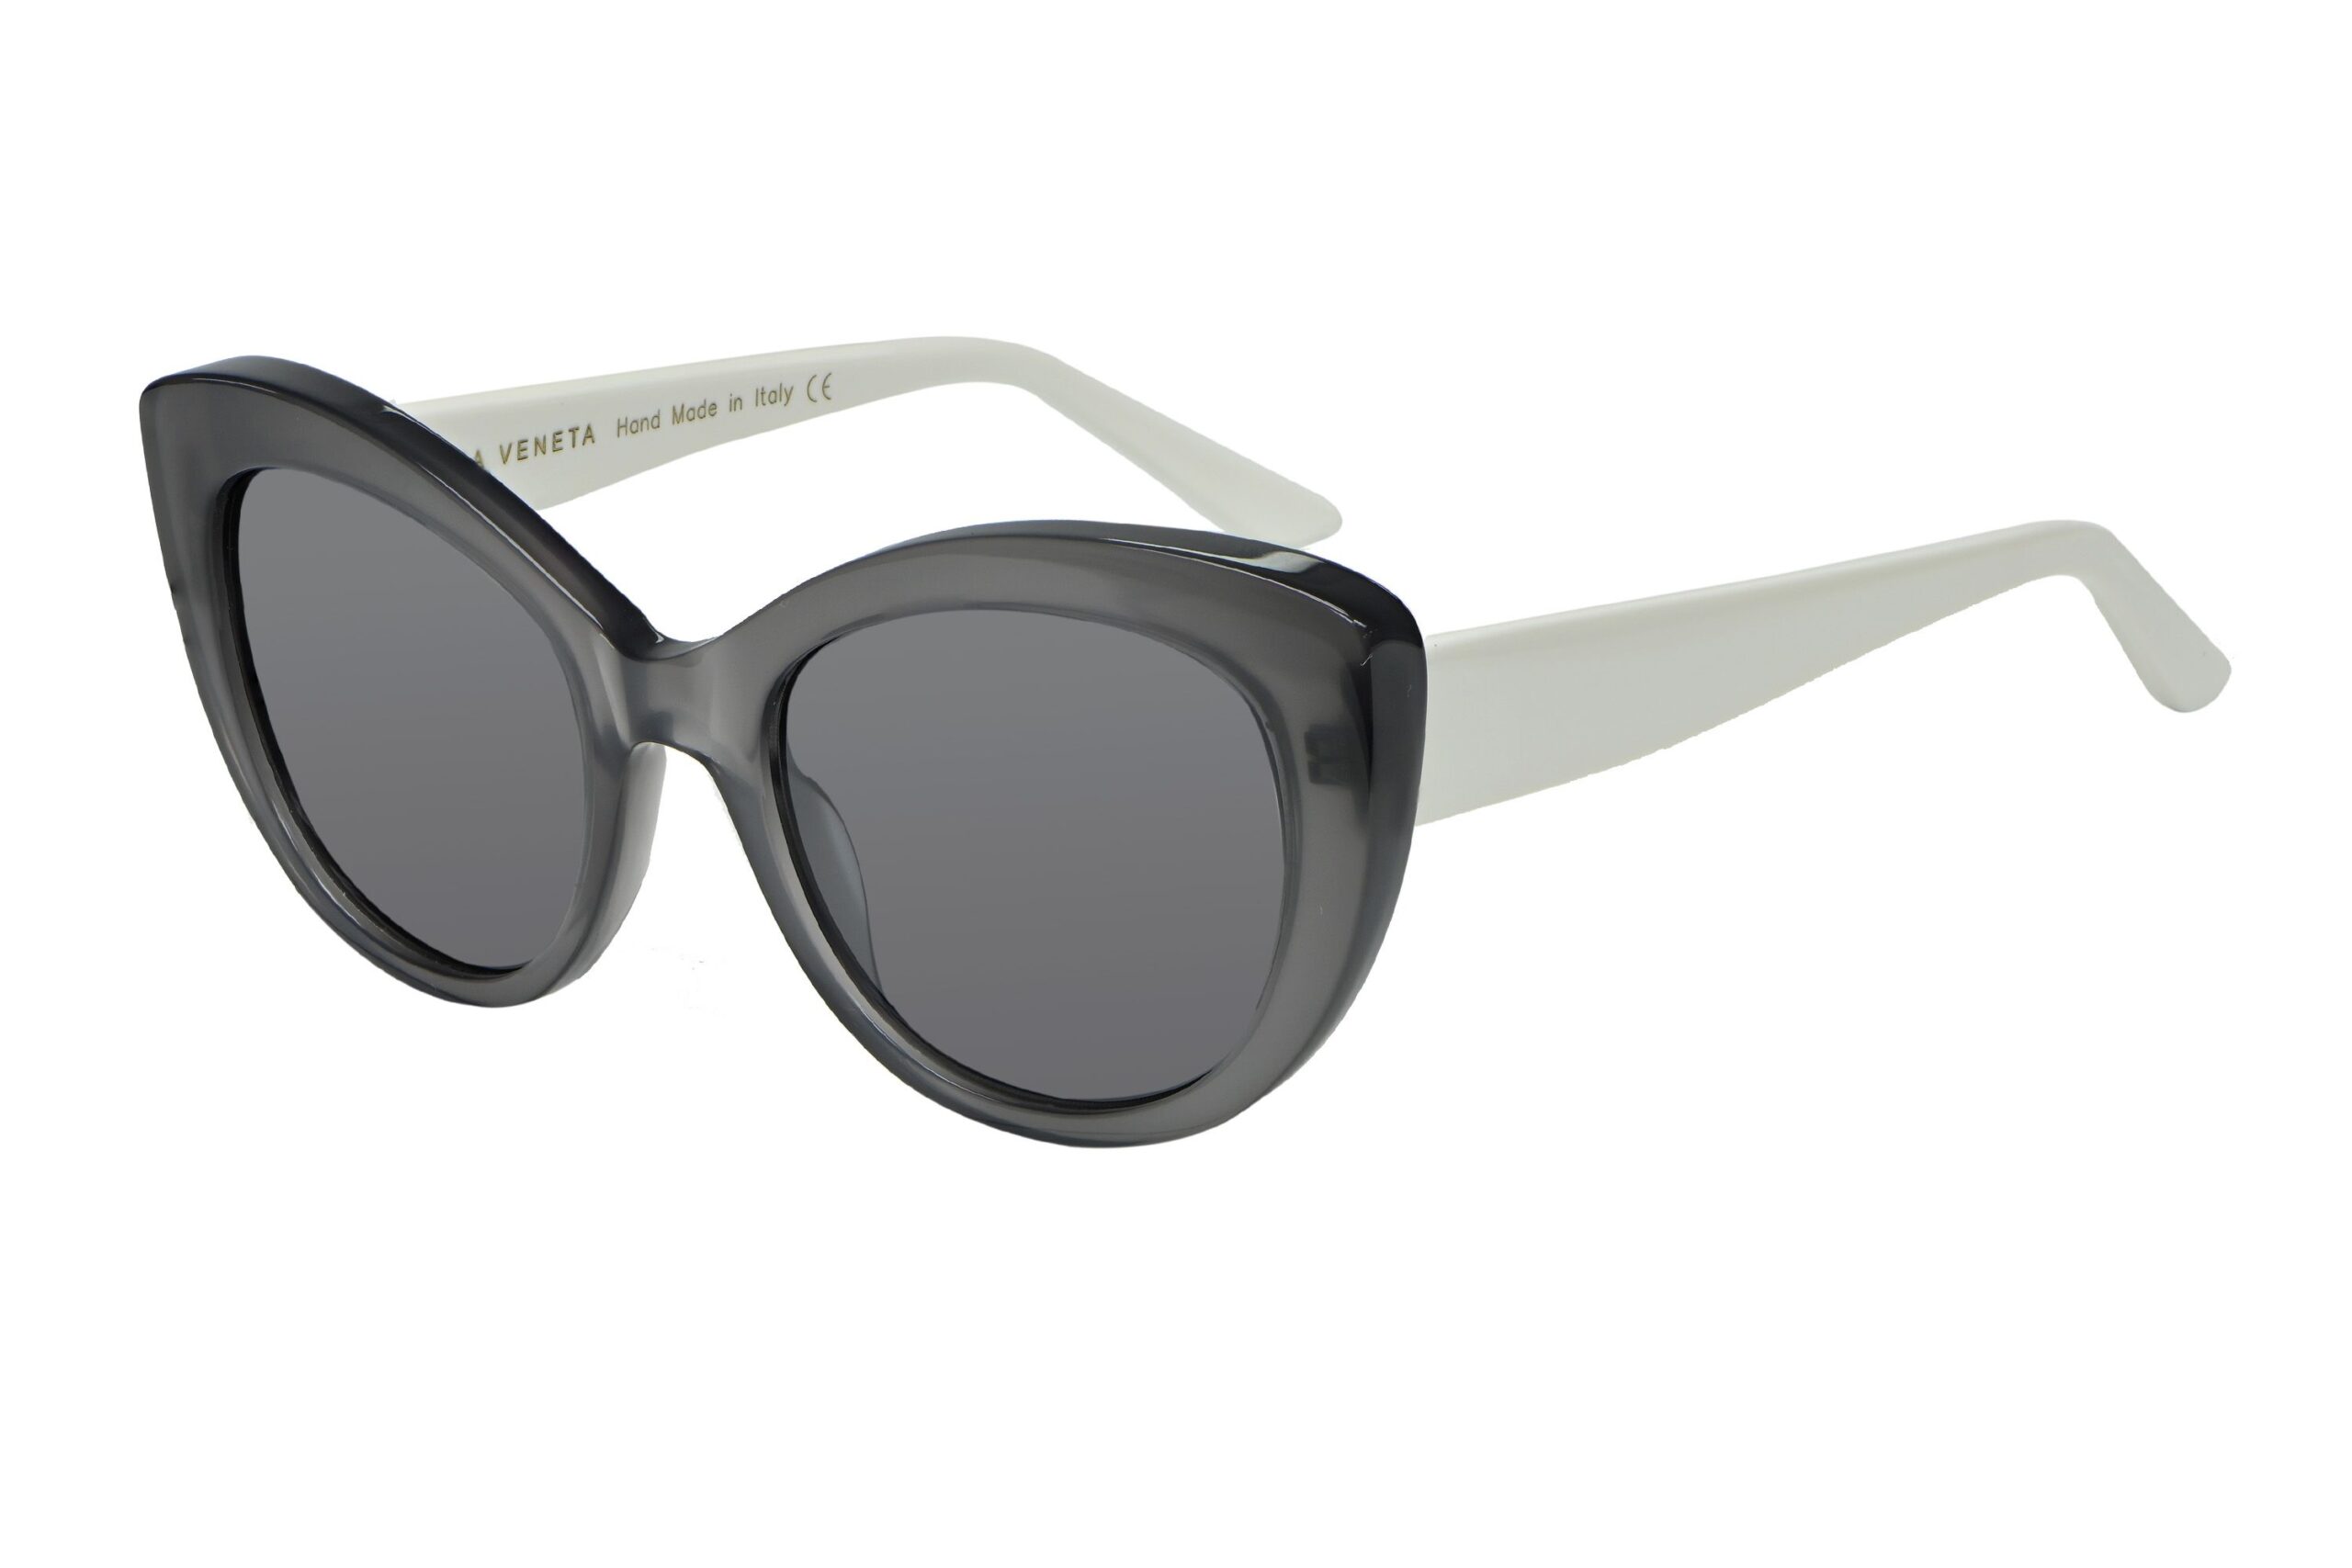 OV34 c.GW – Translucent grey front with white temples